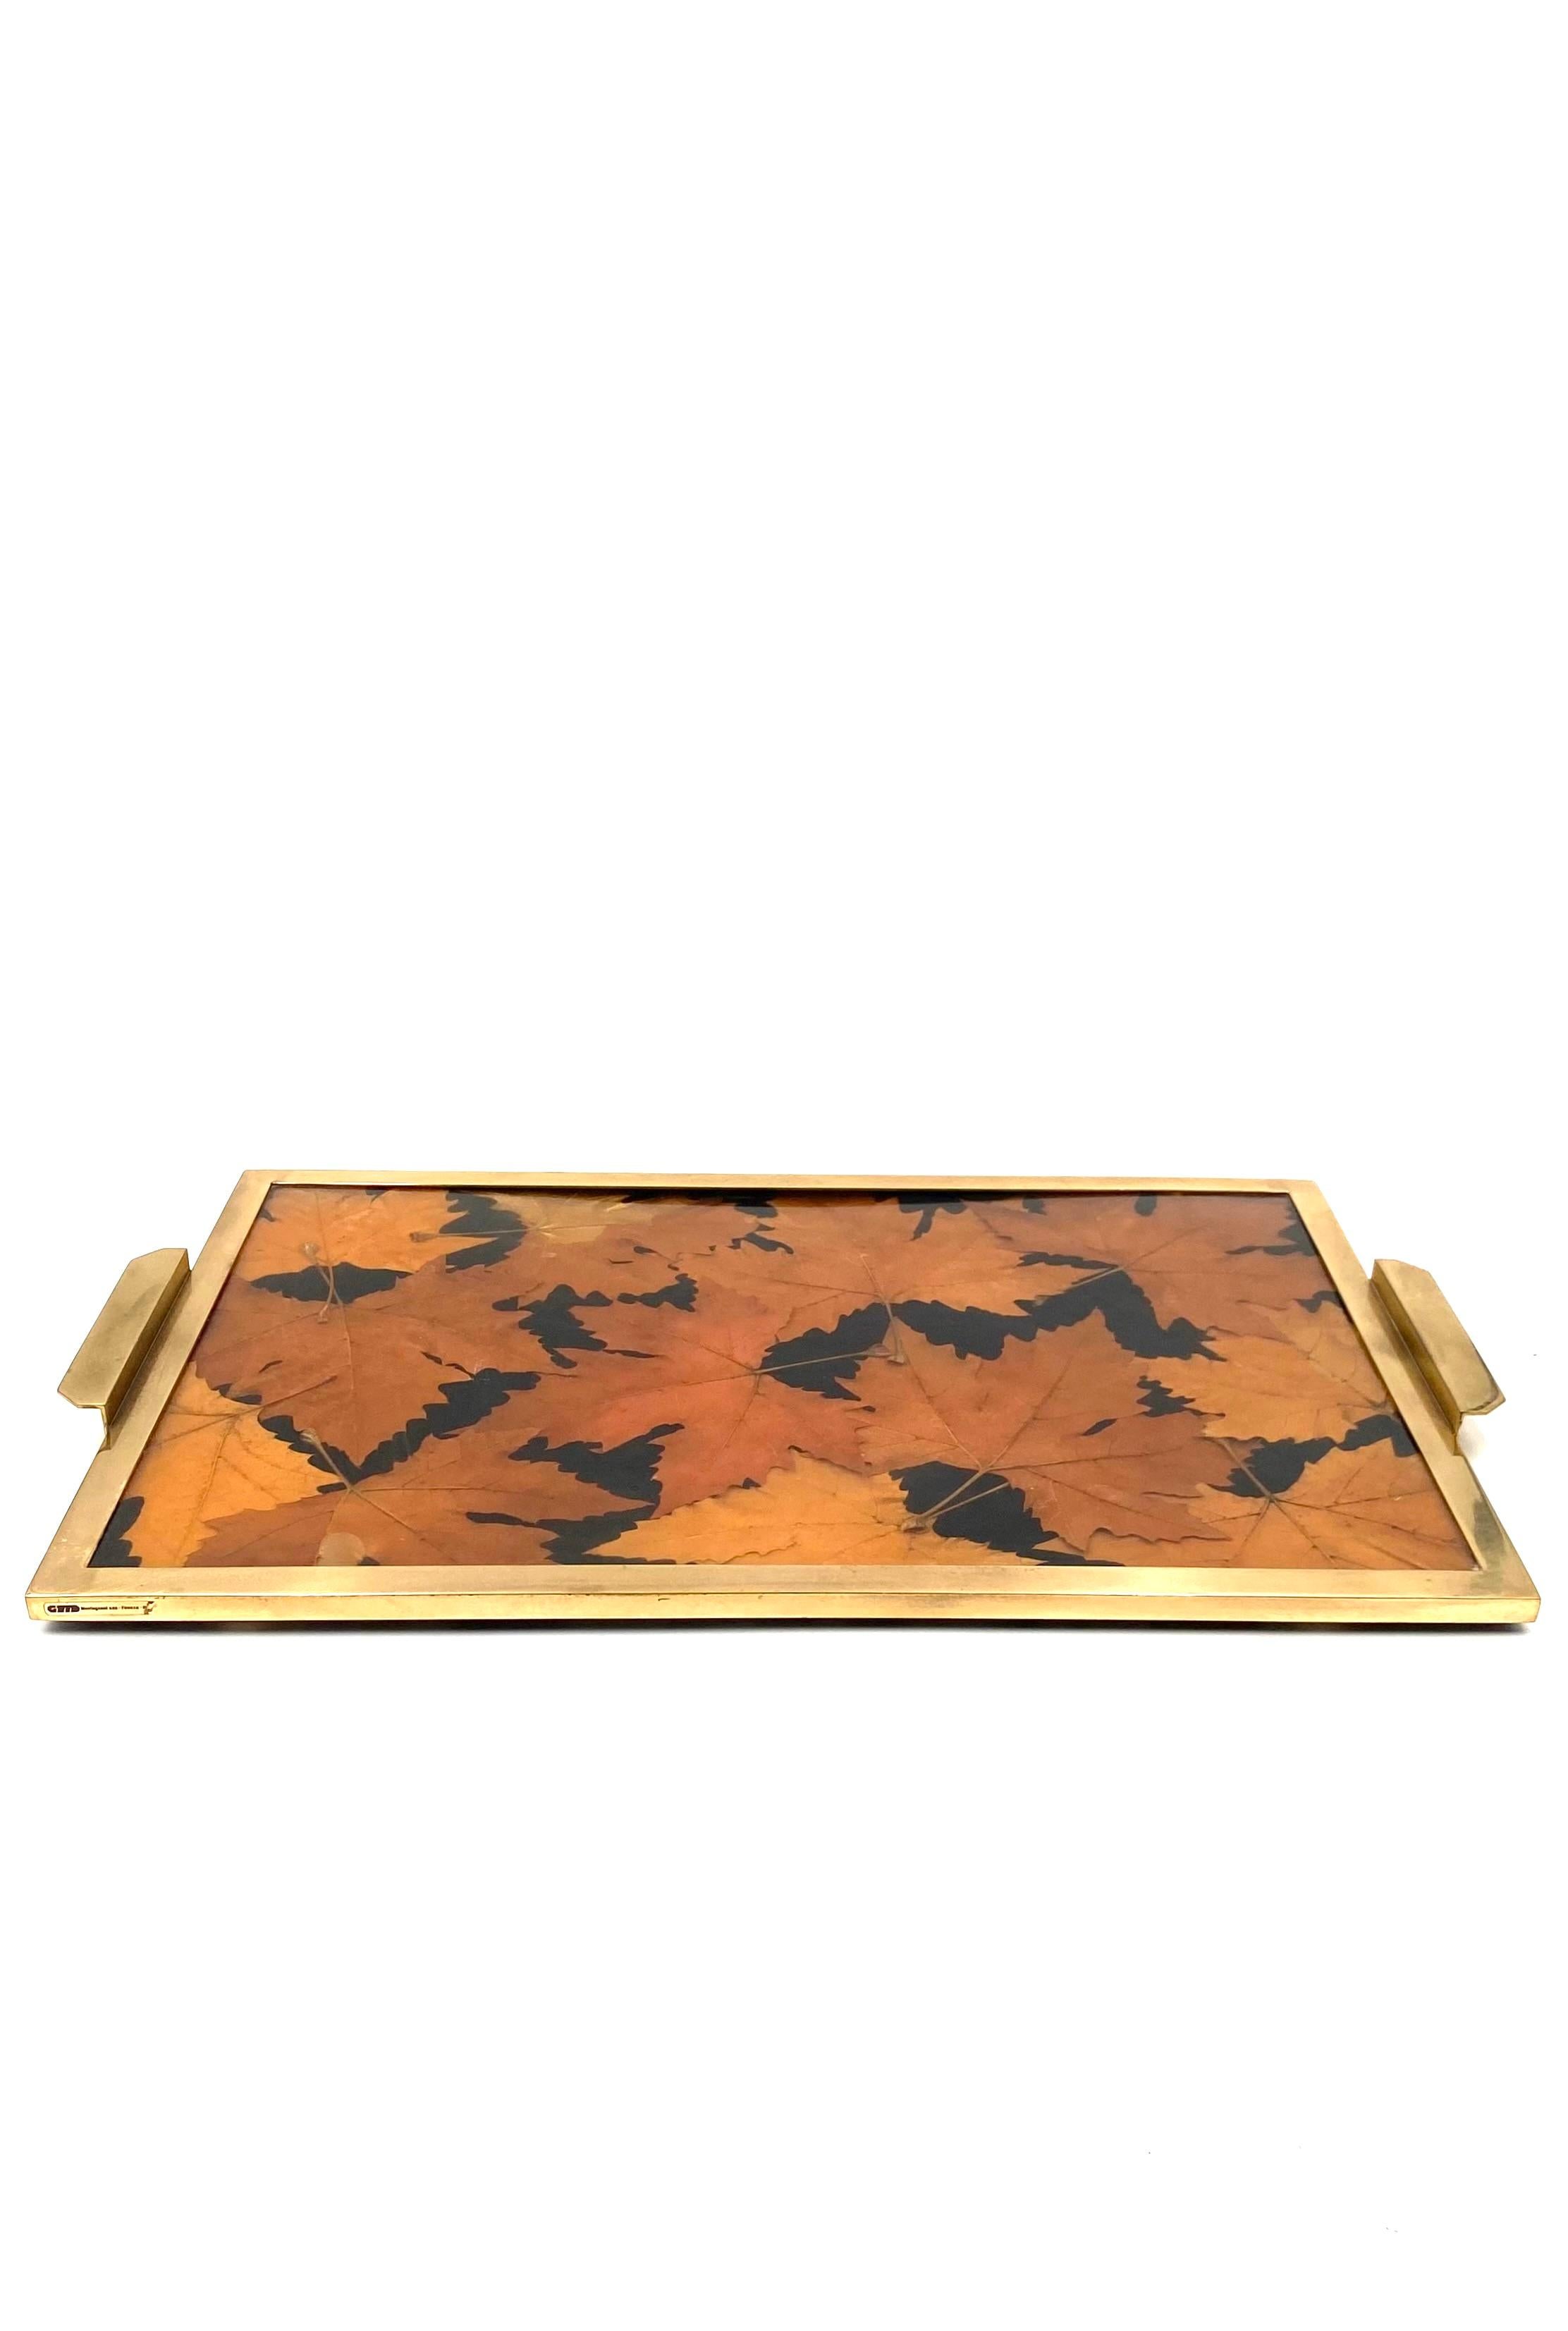 Hollywood regency brass and leaves resin tray, Montagnani Firenze Italy 1970s For Sale 4